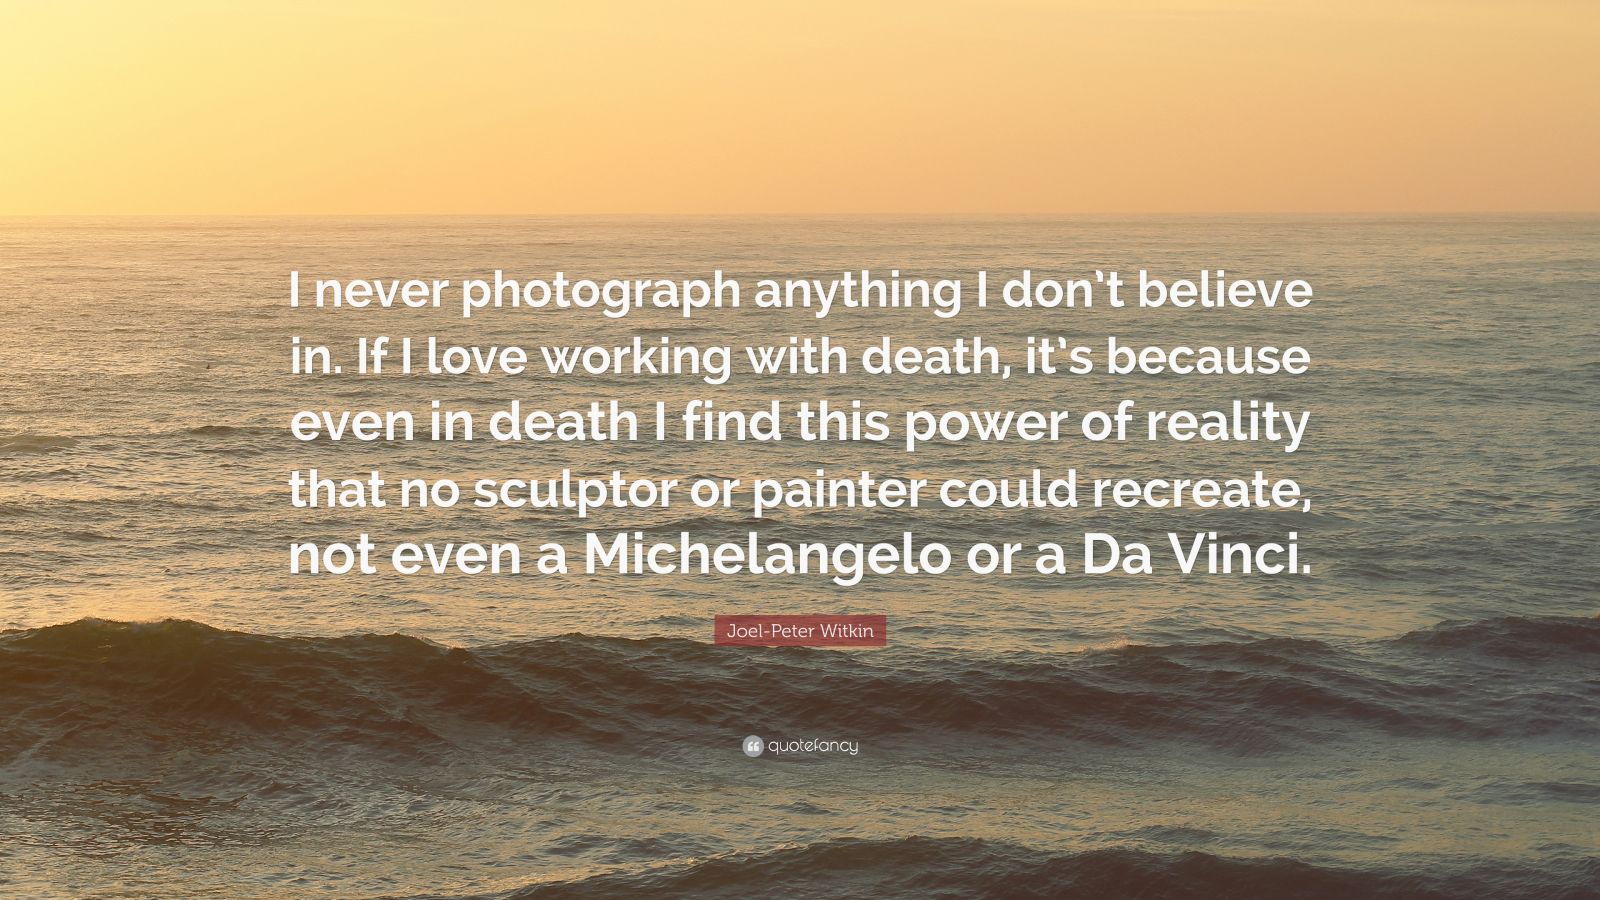 JoelPeter Witkin Quote “I never photograph anything I